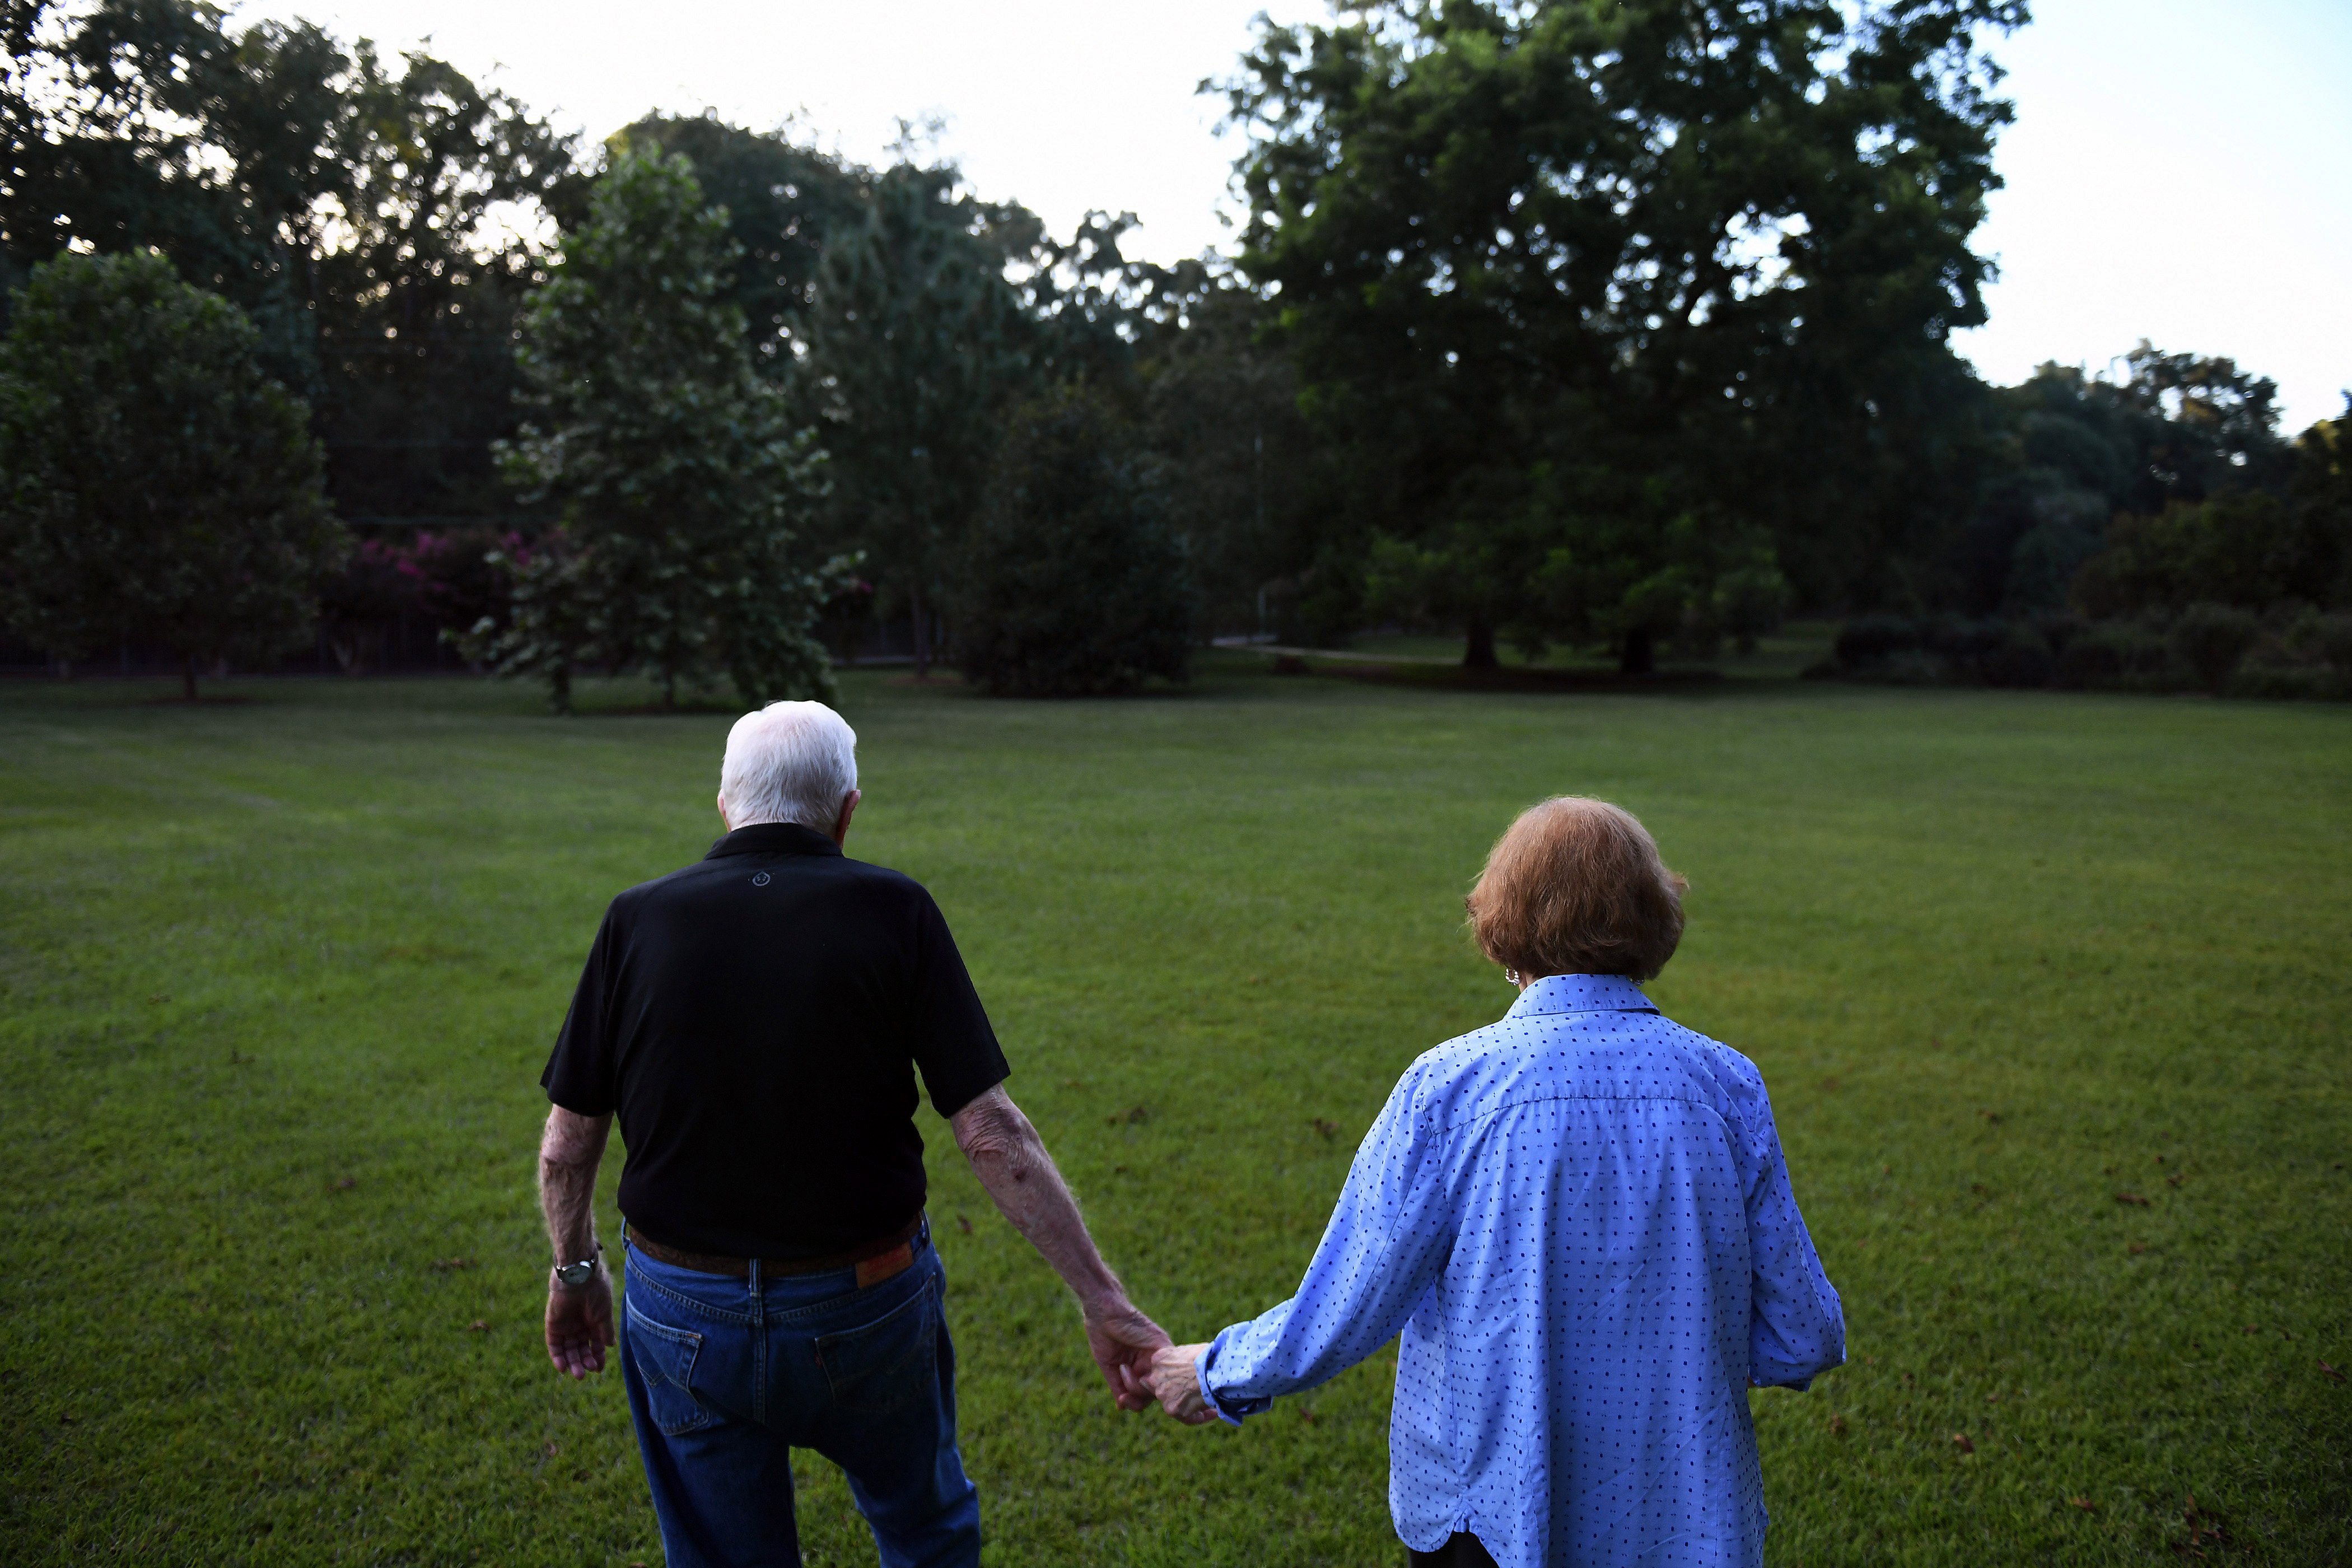 Jimmy Carter walks with his wife, Rosalynn Carter towards their home on Saturday August 4, 2018 in Plains, Georgia ┃Source: Getty Images